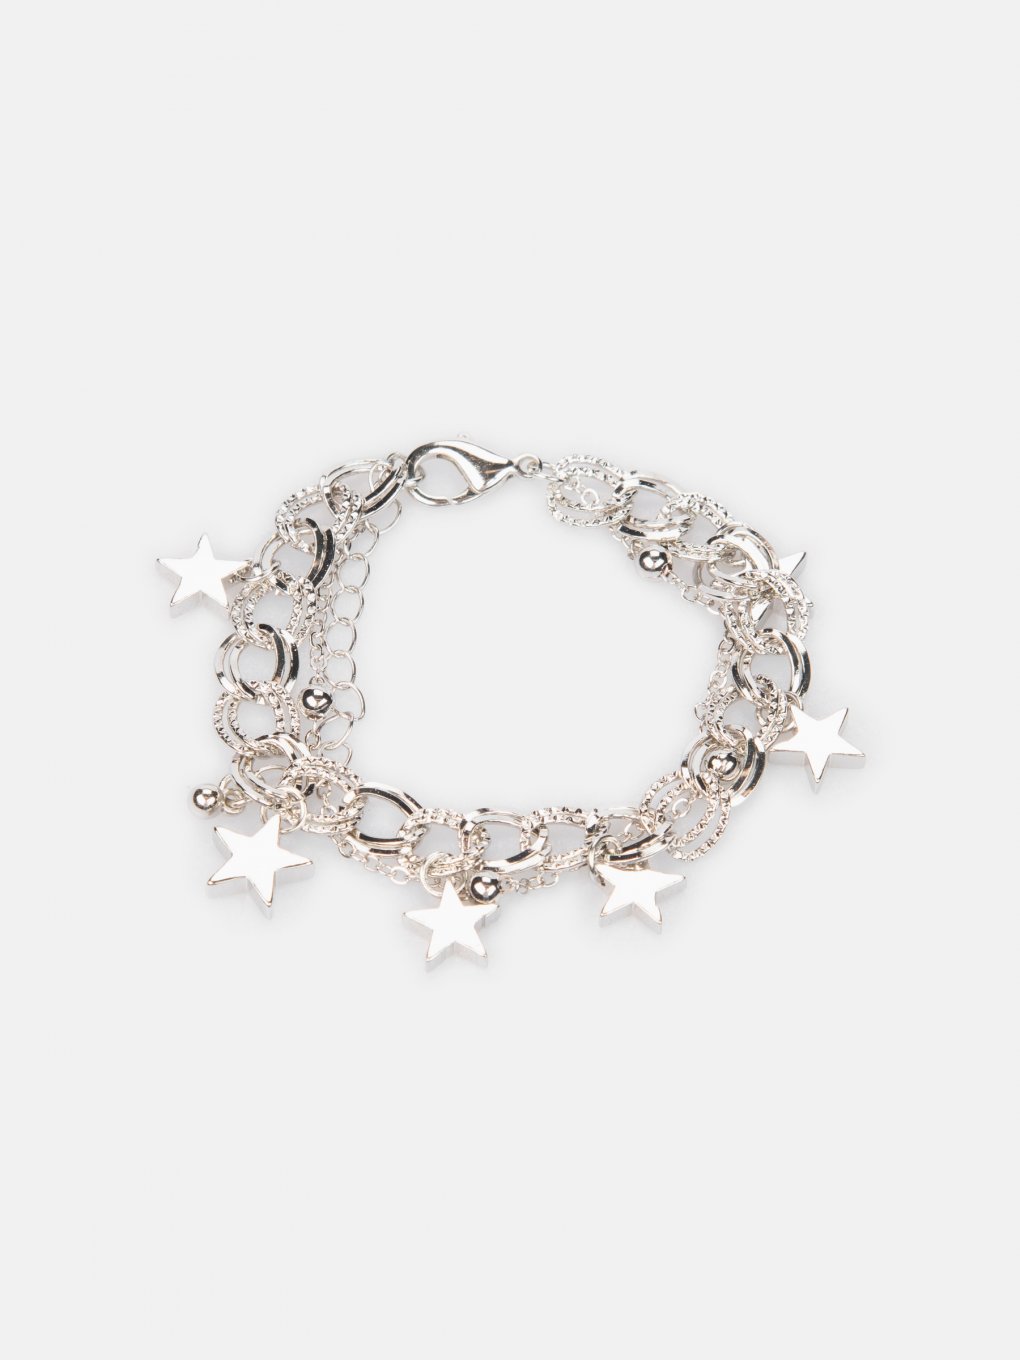 Bracelet with chains and star pendants